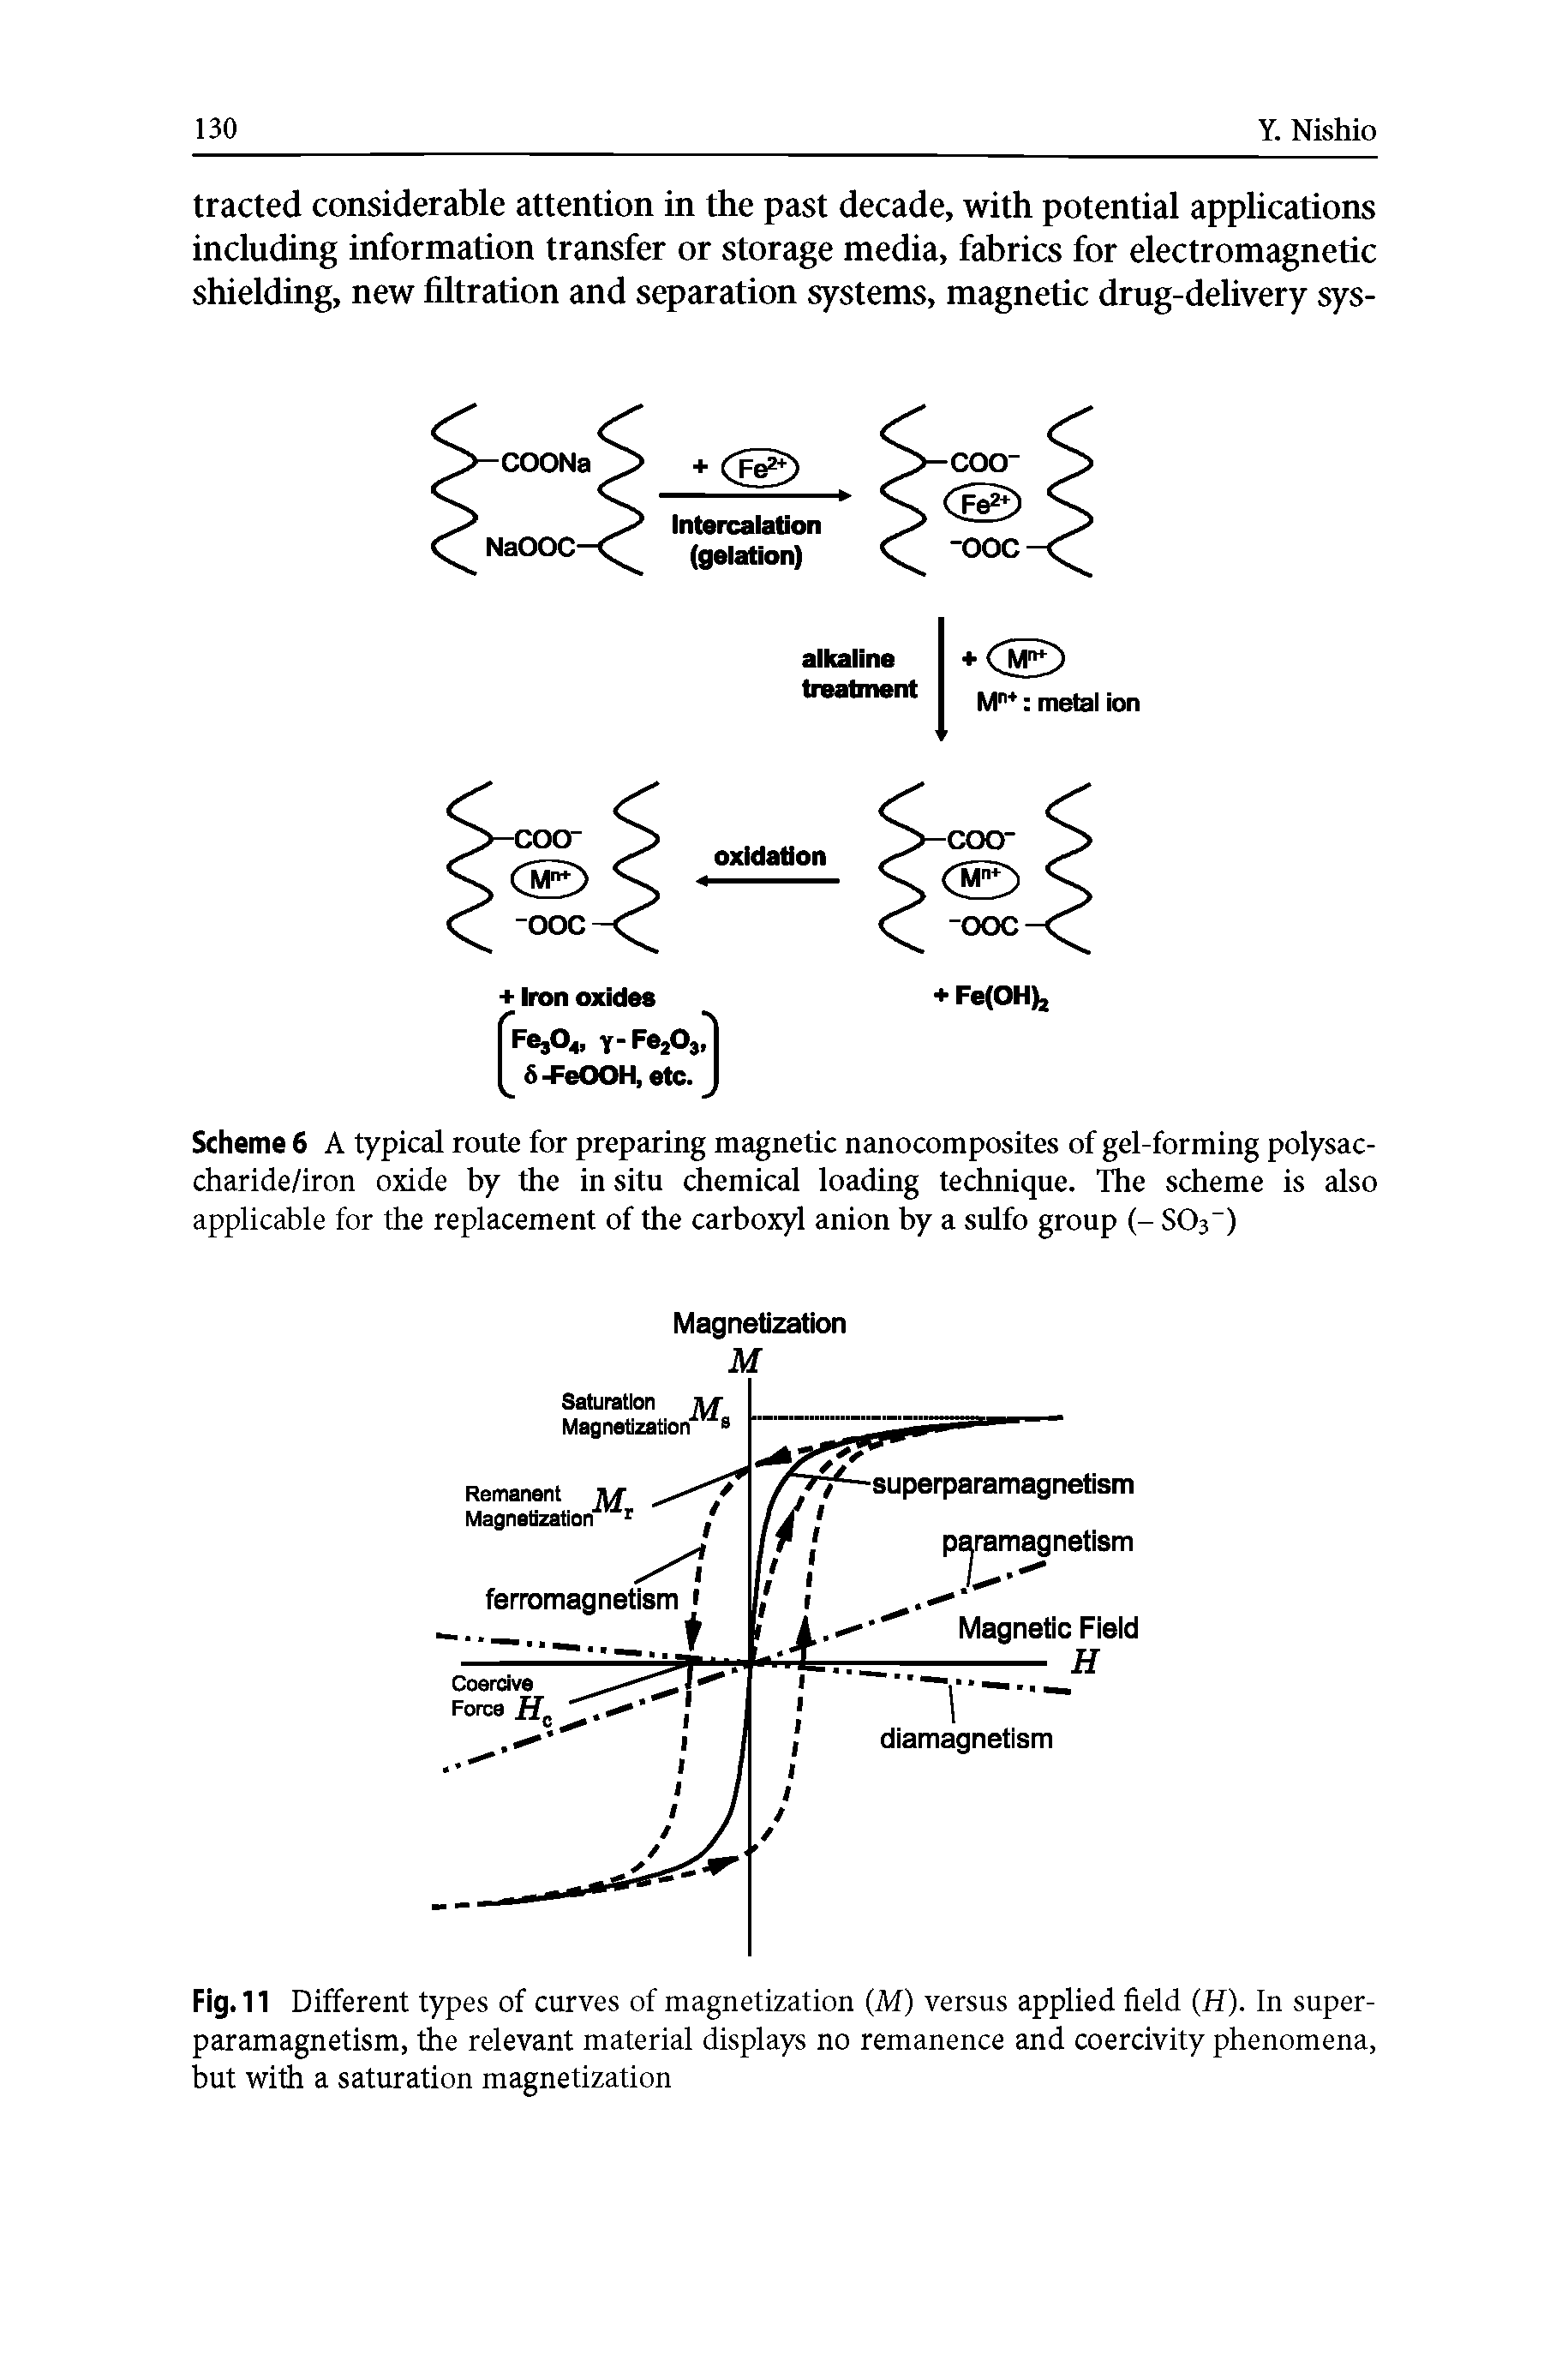 Scheme 6 A typical route for preparing magnetic nanocomposites of gel-forming polysac-charide/iron oxide by the in situ chemical loading technique. The scheme is also applicable for the replacement of the carboxyl anion by a sulfo group (- SC>3 )...